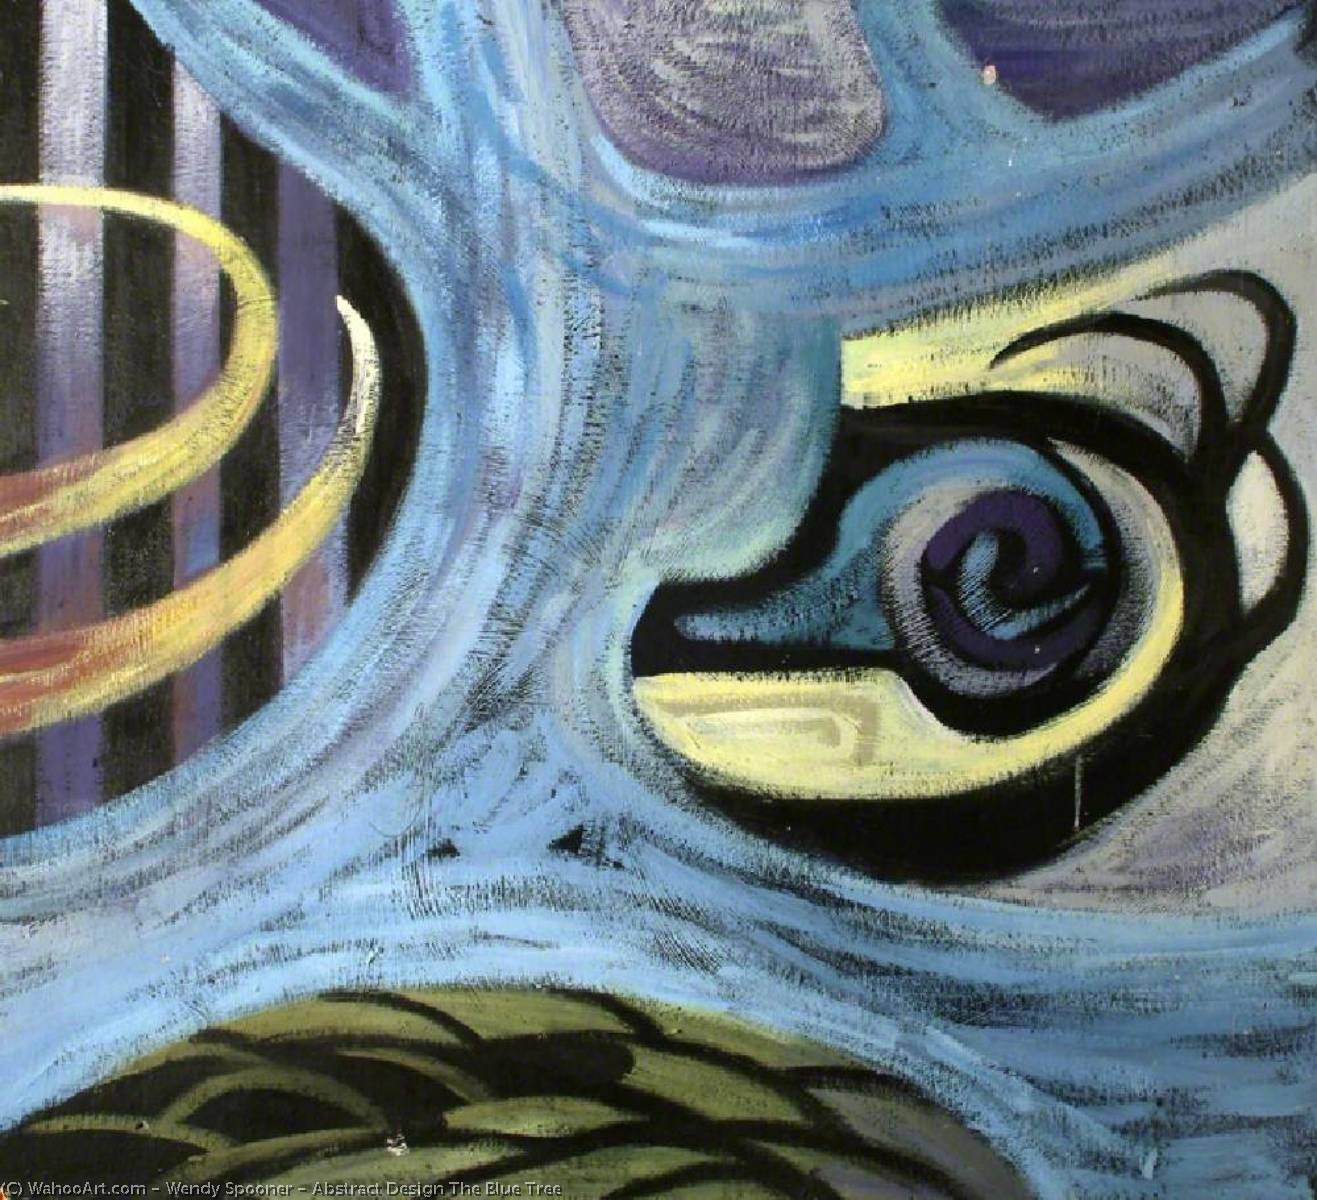 WikiOO.org - Encyclopedia of Fine Arts - Maalaus, taideteos Wendy Spooner - Abstract Design The Blue Tree